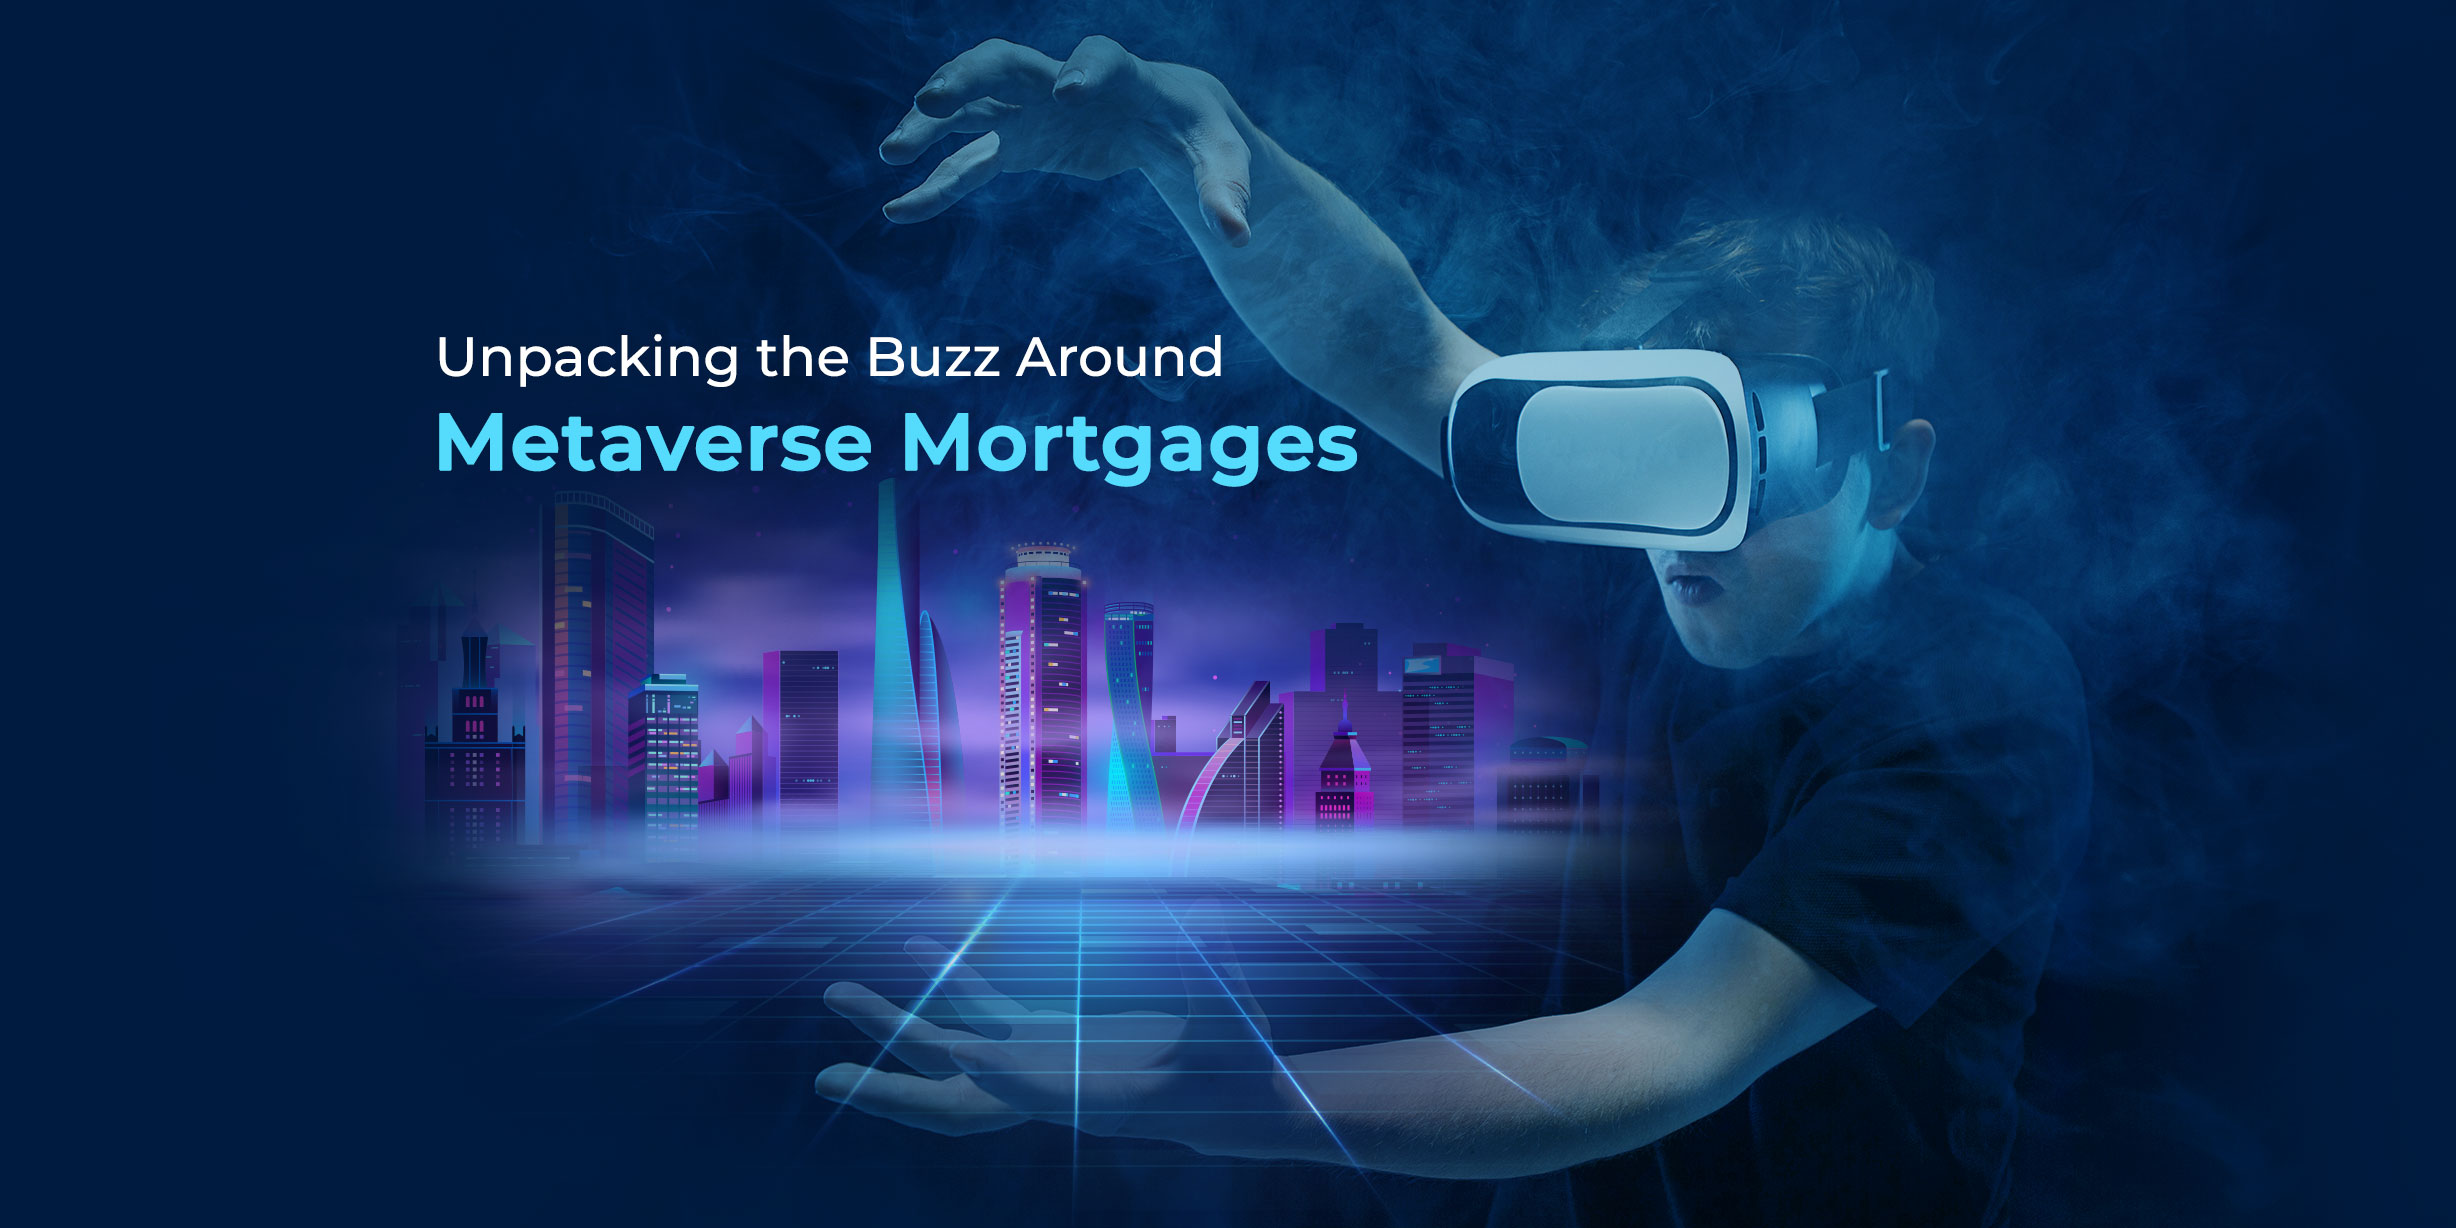 Unpacking the Buzz Around Metaverse Mortgages